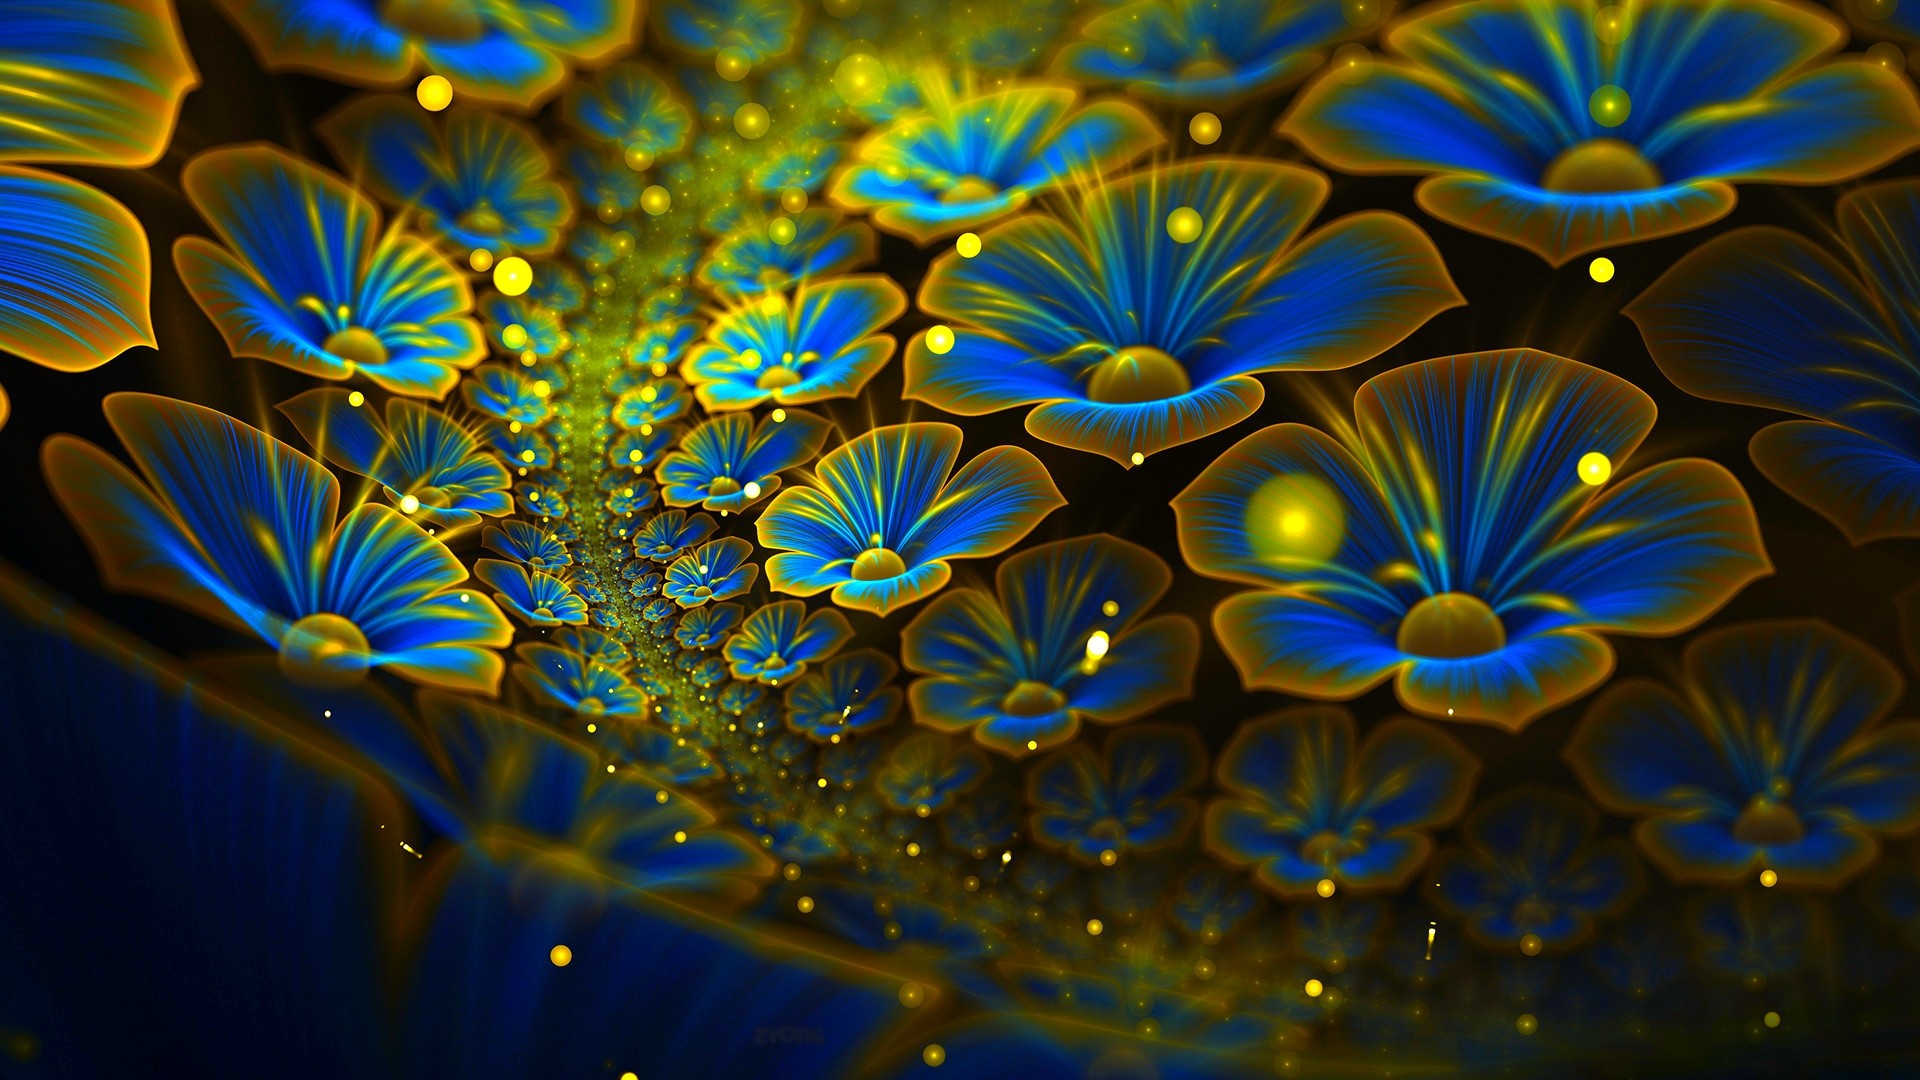 1920x1080 Abstract 3D Colorful Wallpaper For Desktop.